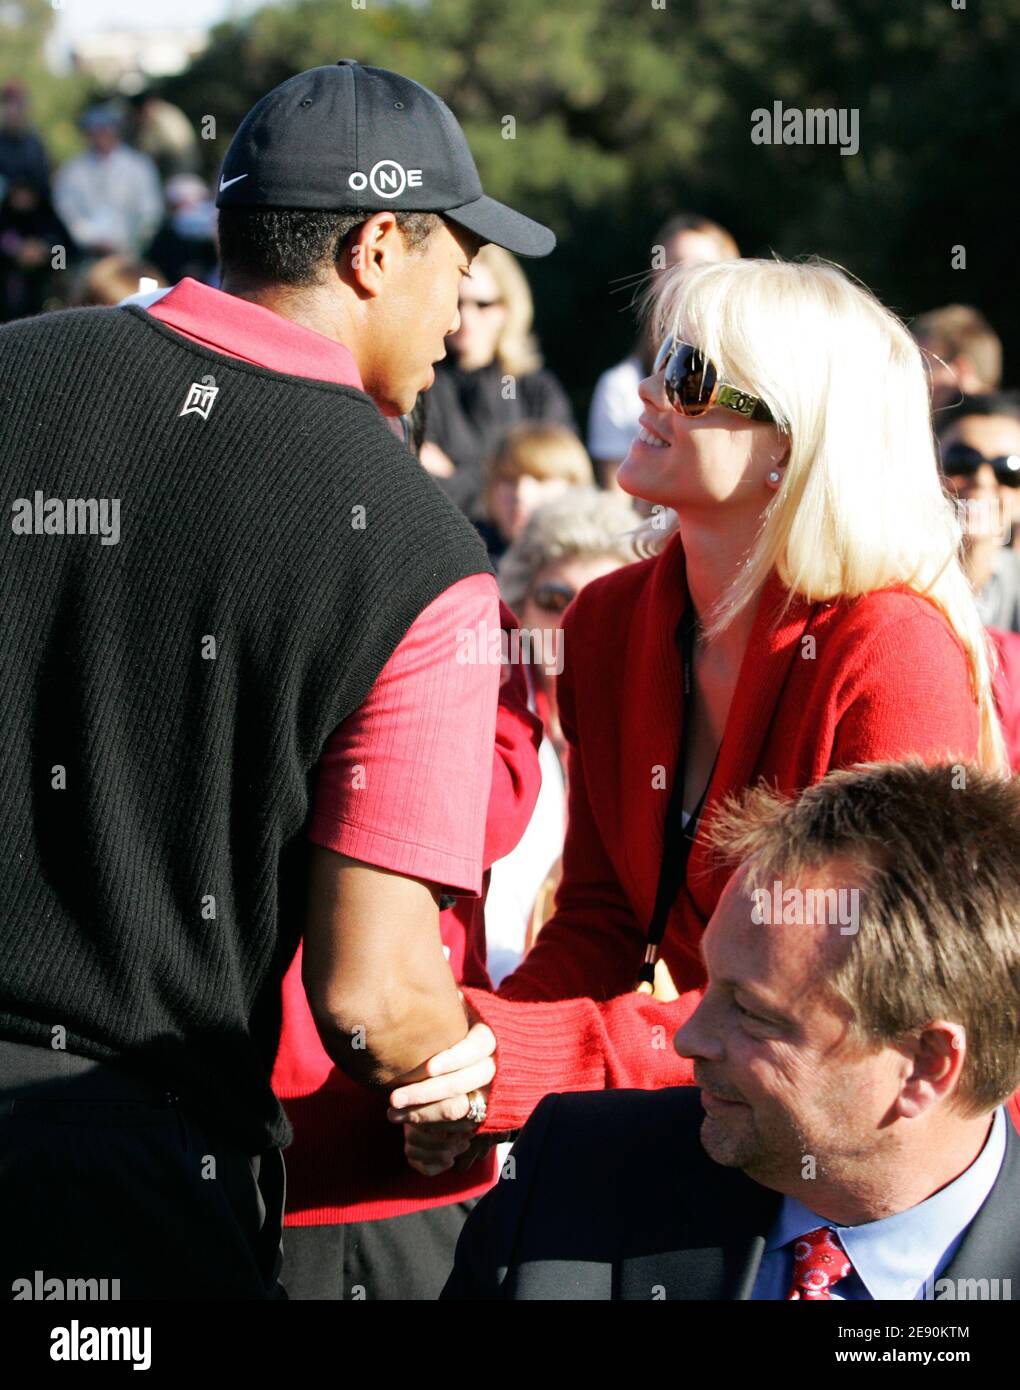 Tiger Woods is congratulated by his wife, Elin Nordegren after winning the Target World Challenge at the Sherwood Country Club in Thousand Oaks, CA, USA on December 16, 2007. Photo by Charles Baus/Cal Sport Media/Cameleon/ABACAPRESS.COM Stock Photo